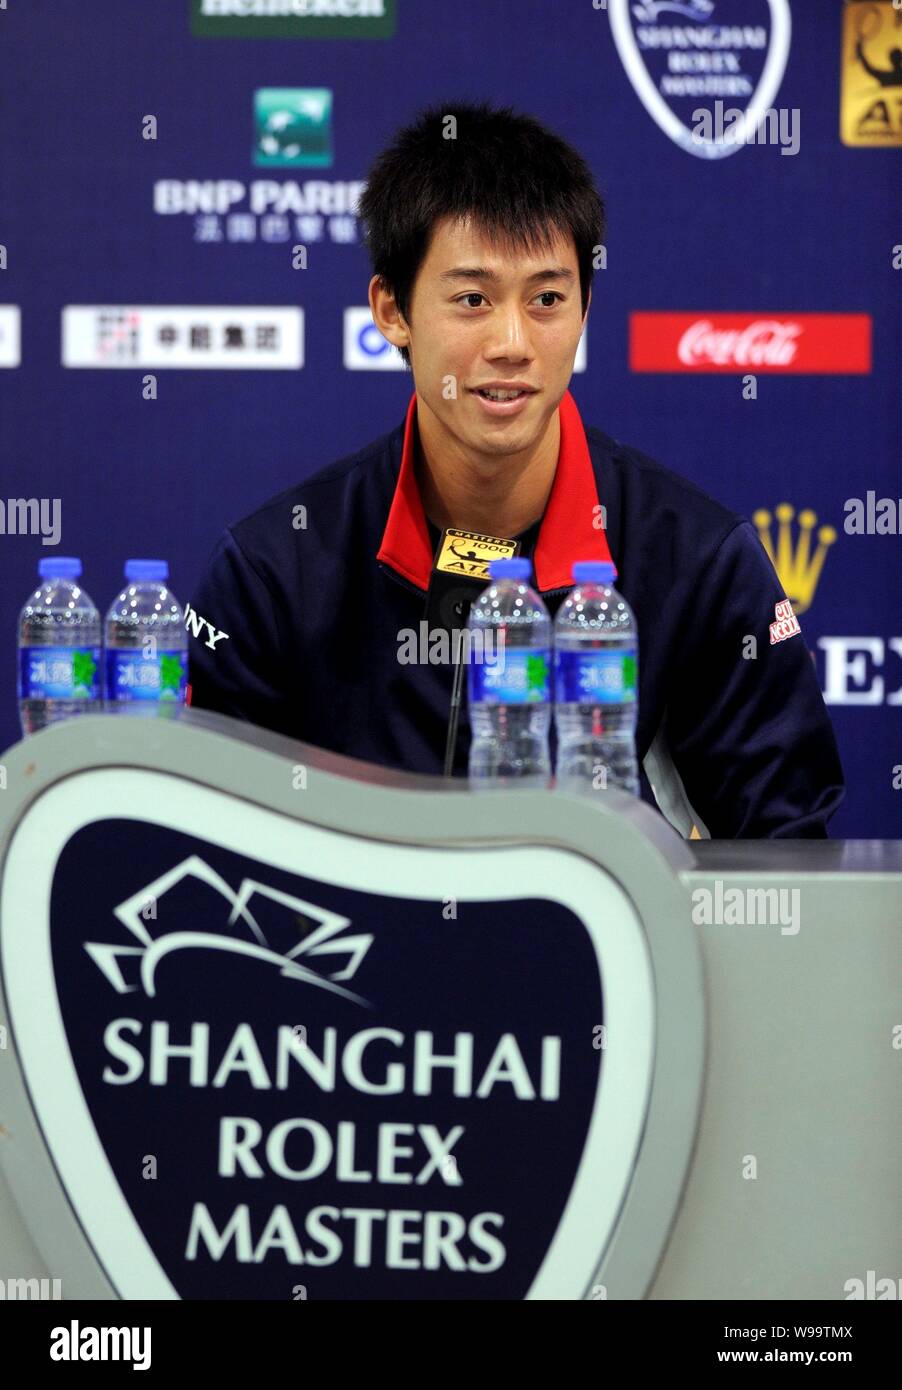 Kei Nishikori of Japan attends a press conference after beating Alexandr Dolgopolov of Ukraine during their quarterfinal match at the 2011 Shanghai Ro Stock Photo